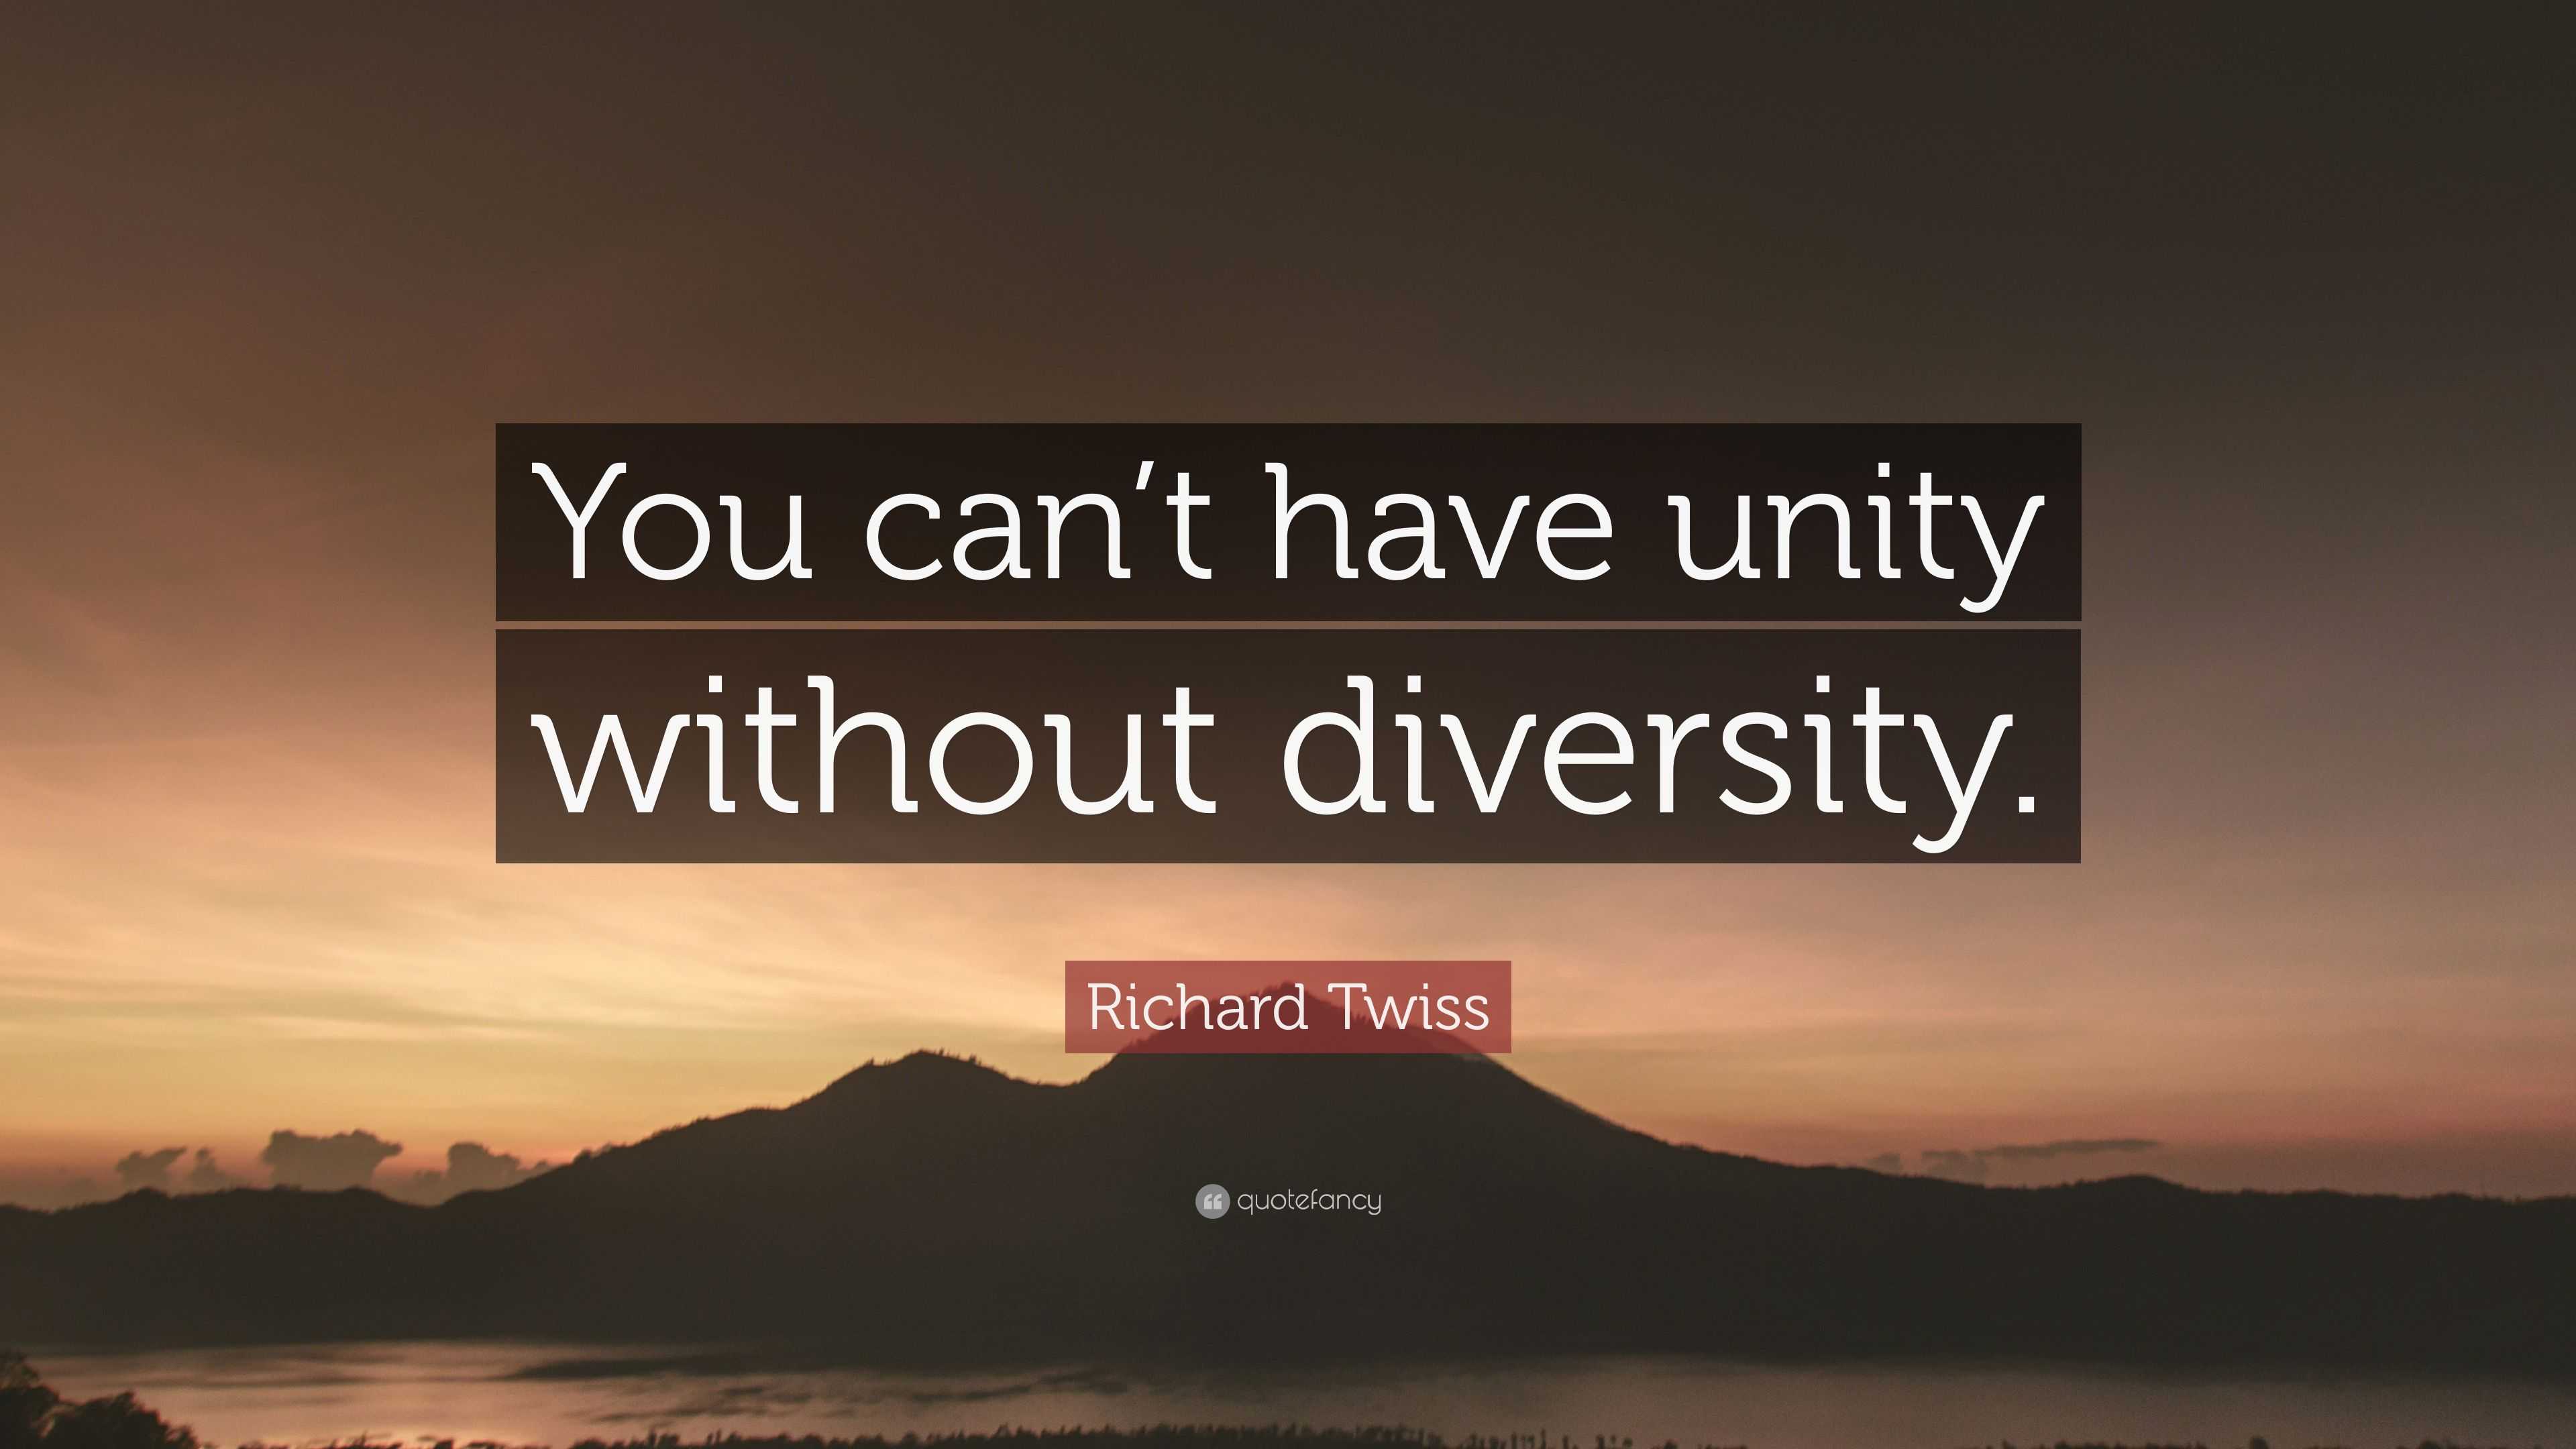 Richard Twiss Quote: “You can’t have unity without diversity.” (12